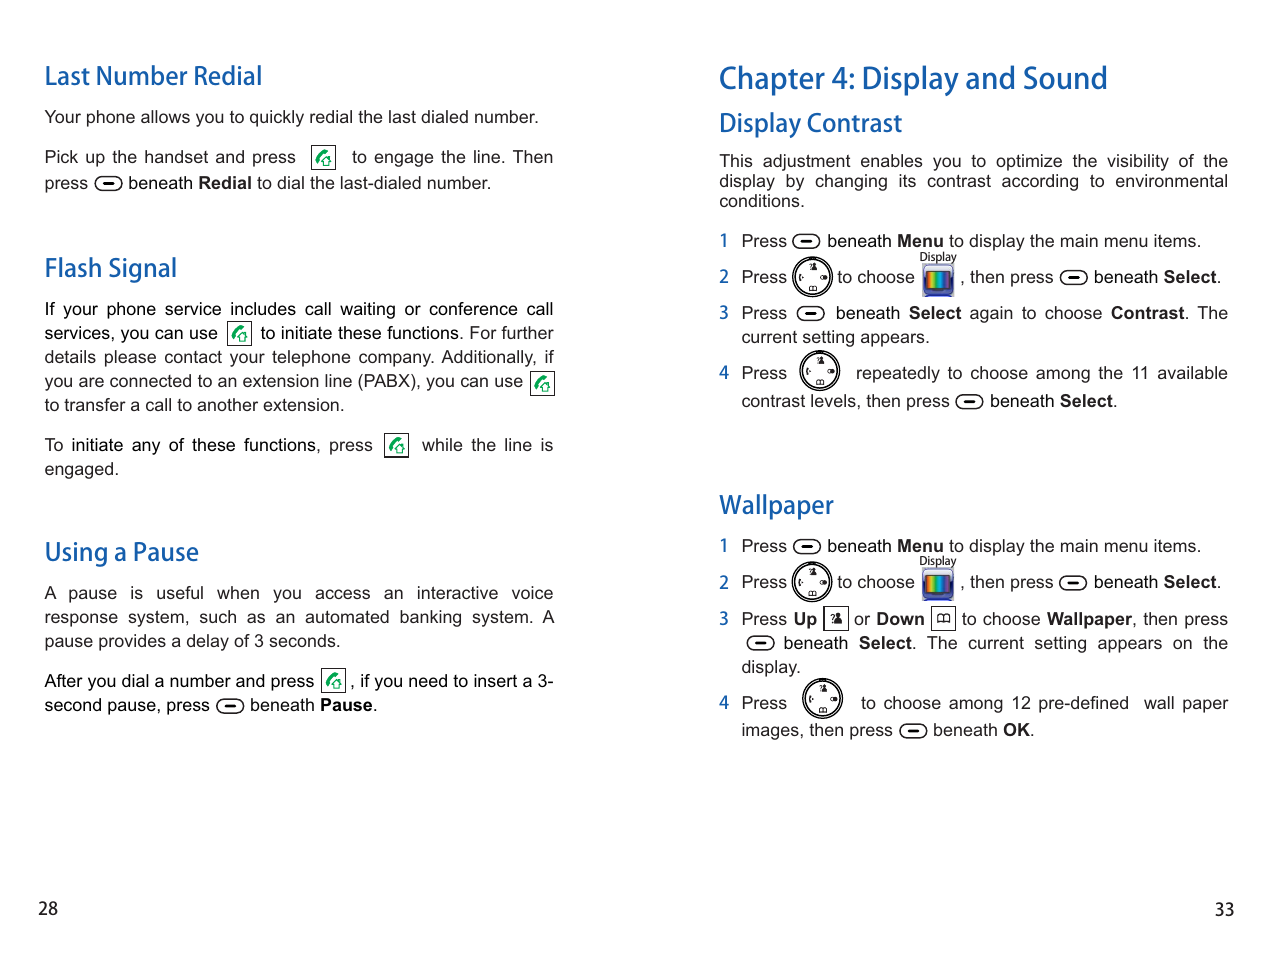 Chapter 4: display and sound, Display contrast wallpaper, Last number redial flash signal using a pause | iCreation i-700 User Manual | Page 29 / 62